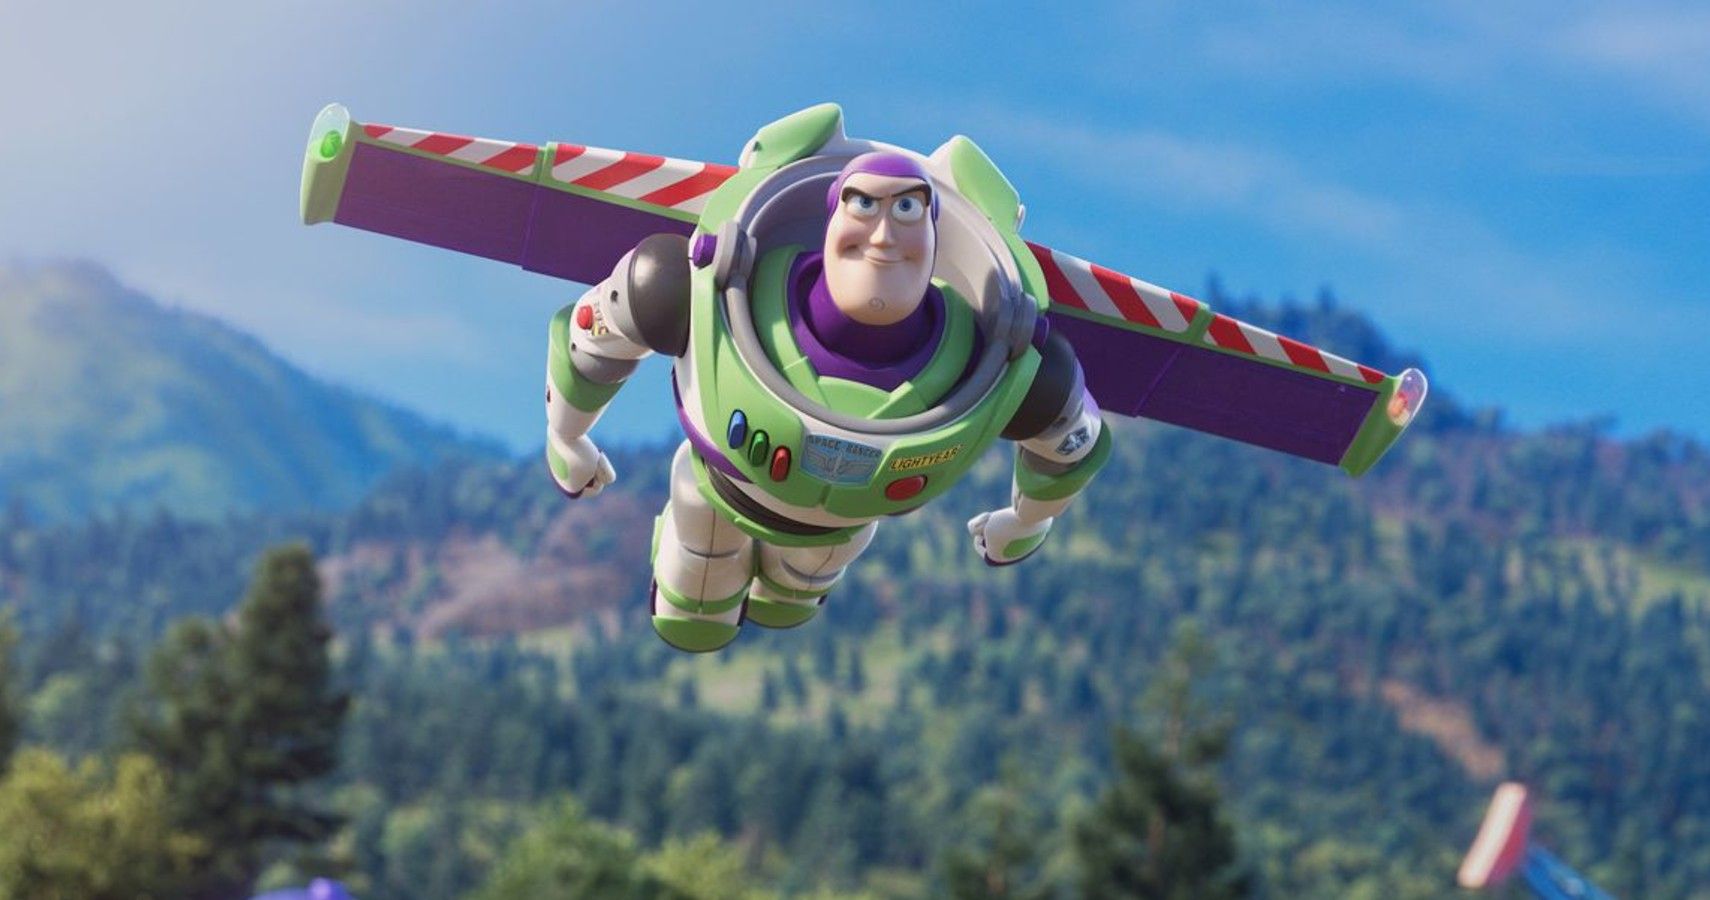 The favorite funny, charming, and calculative spaceman, Buzz Lightyear does...